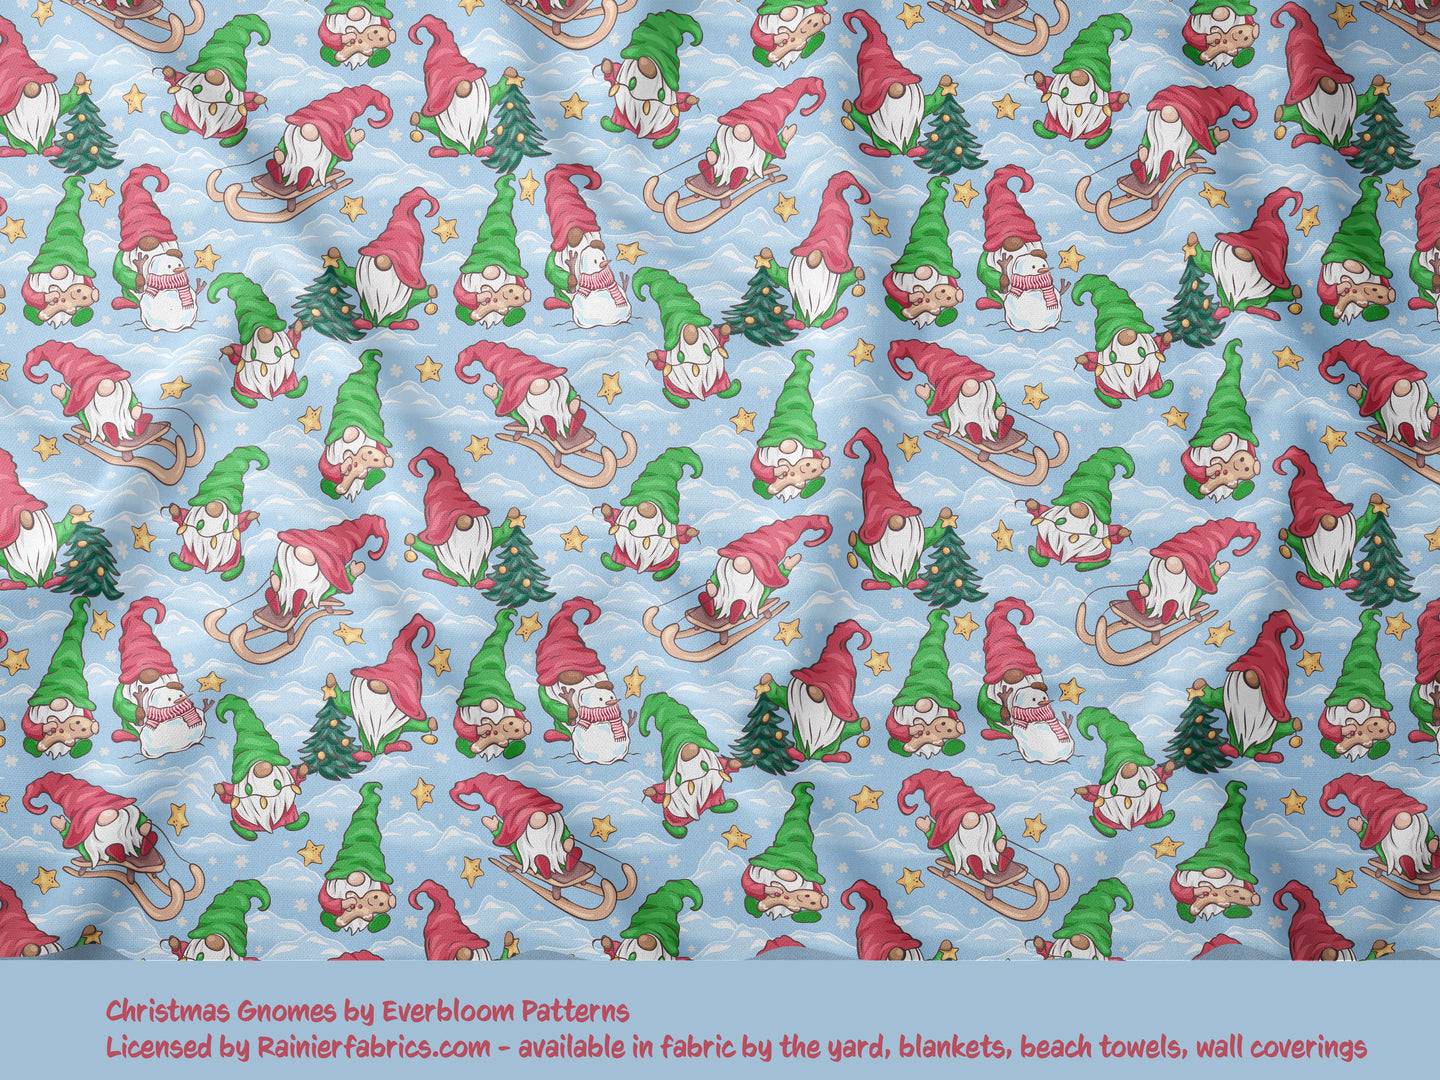 Christmas Gnomes by Everbloom - 2-5 day TAT - Order by 1/2 yard; Blankets and towels available too